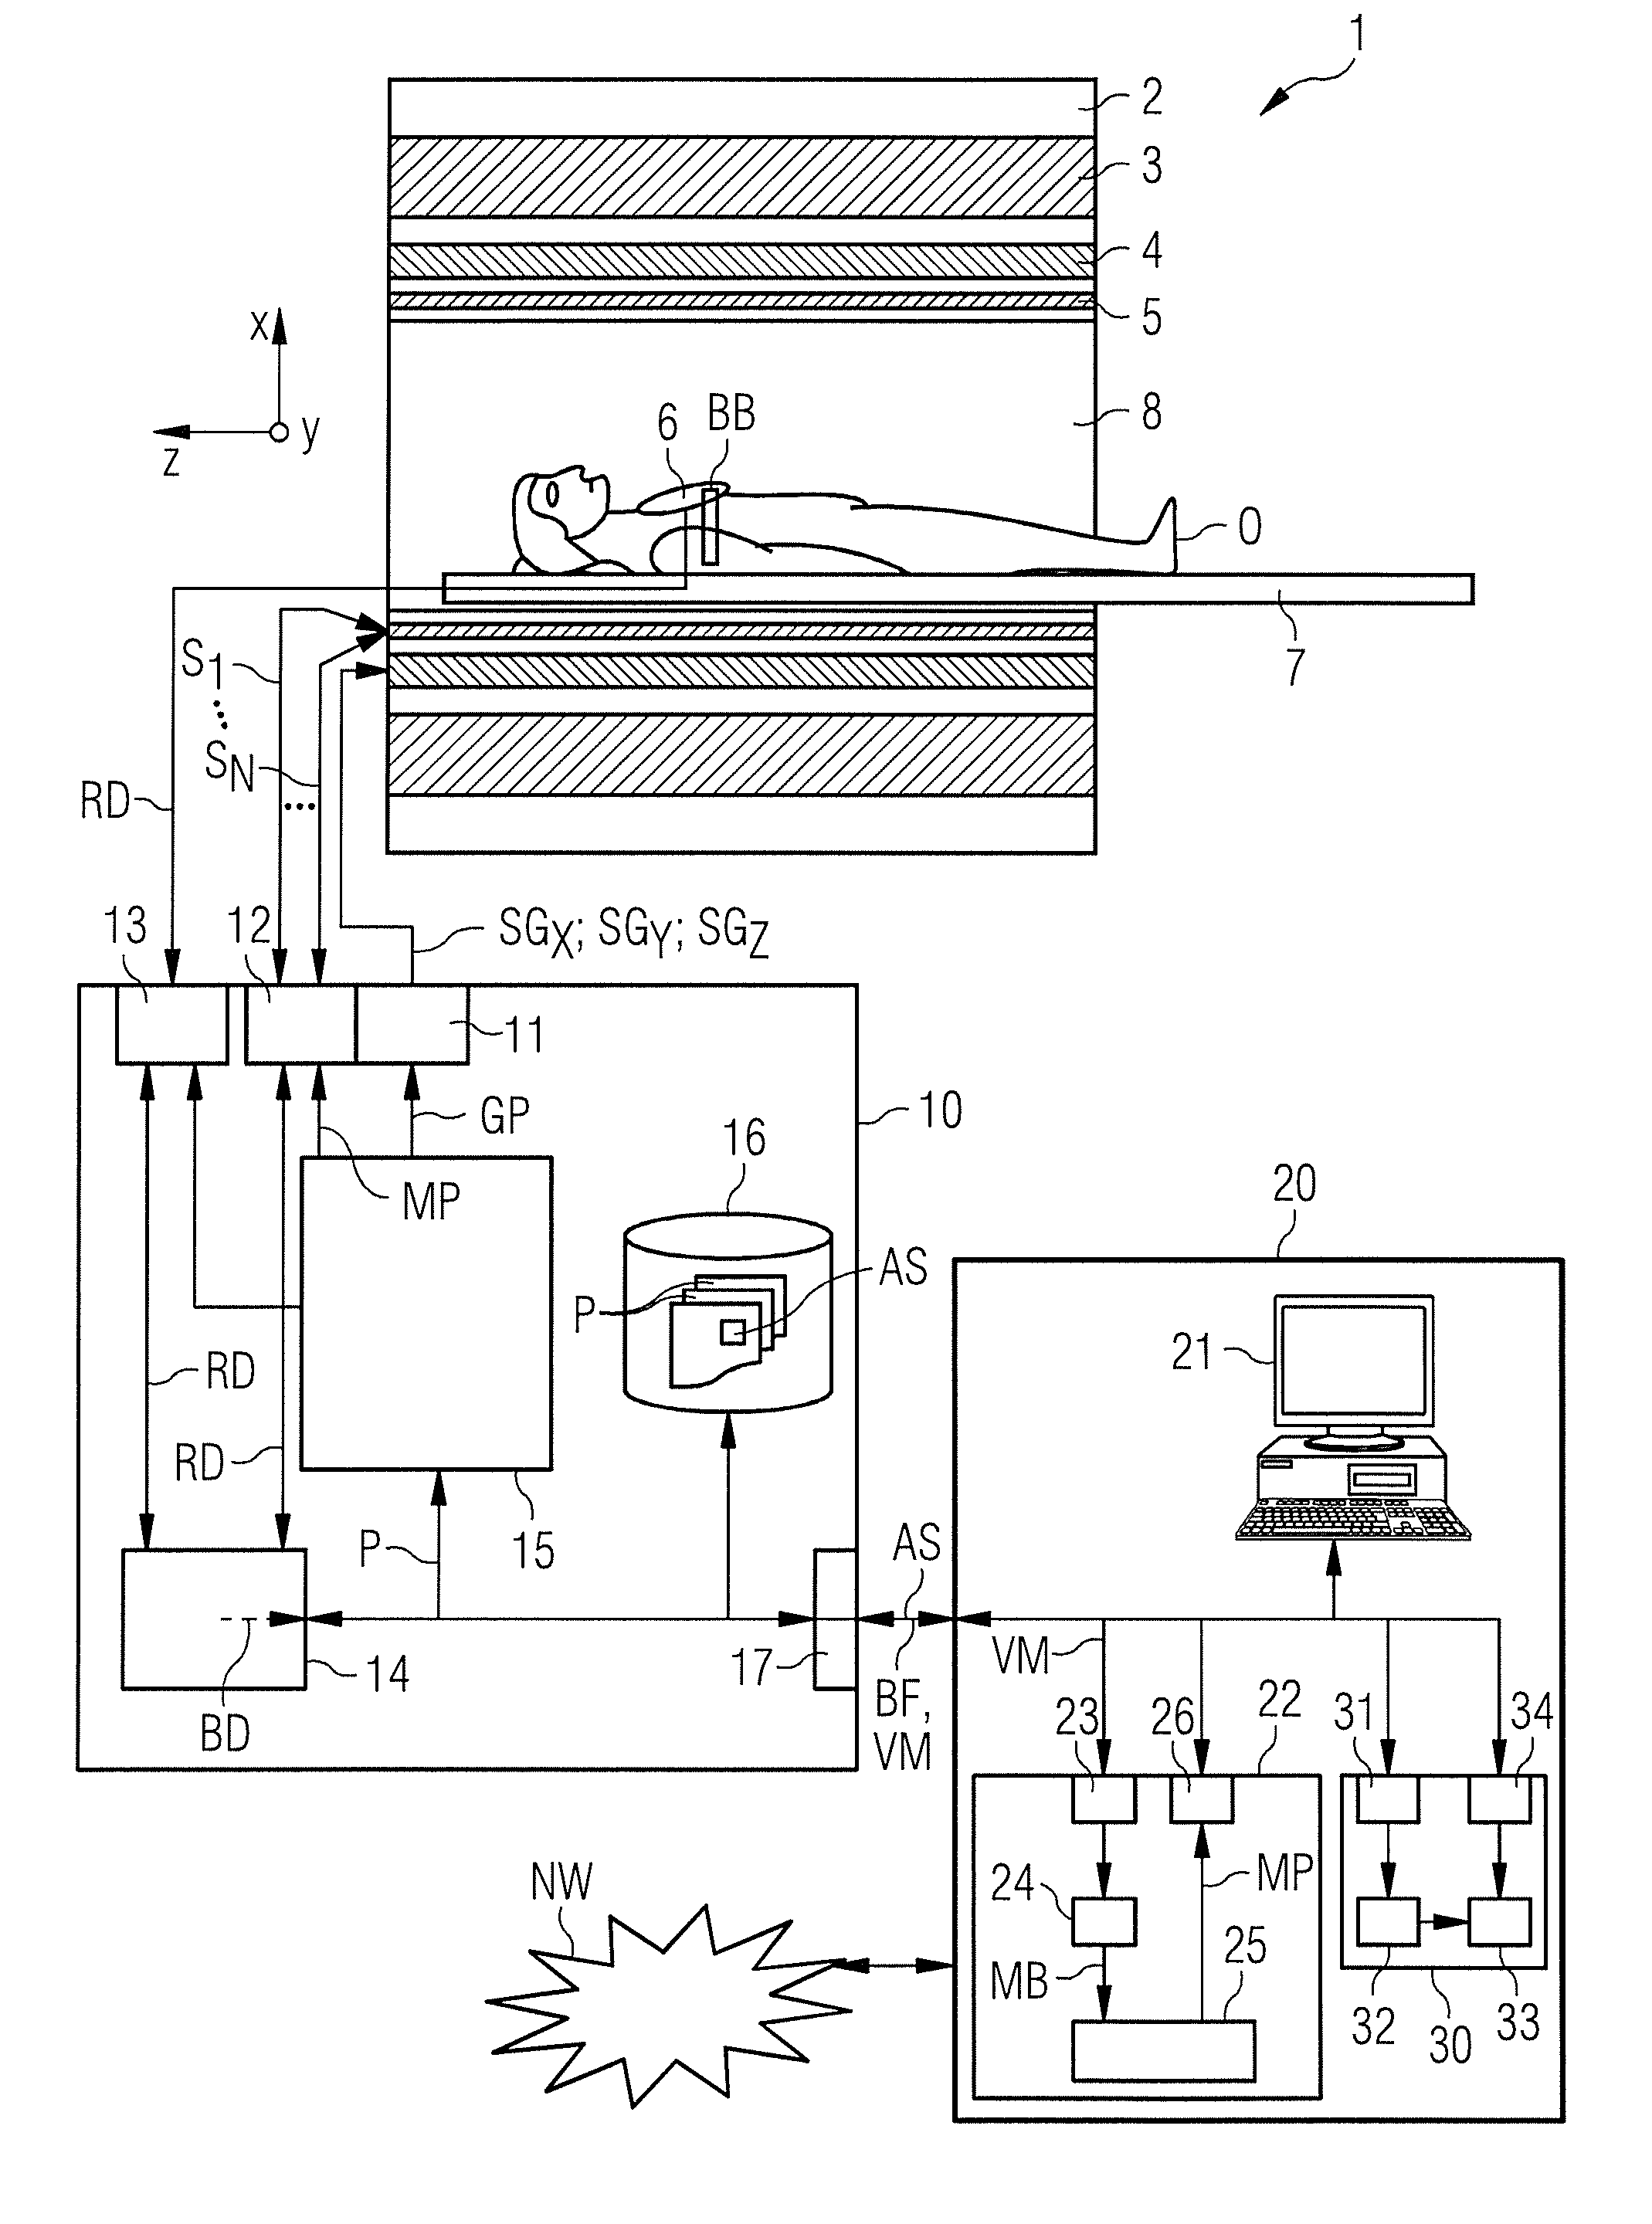 Method for determining a magnetic resonance control sequence, and magnetic resonance system operable according to the control sequence